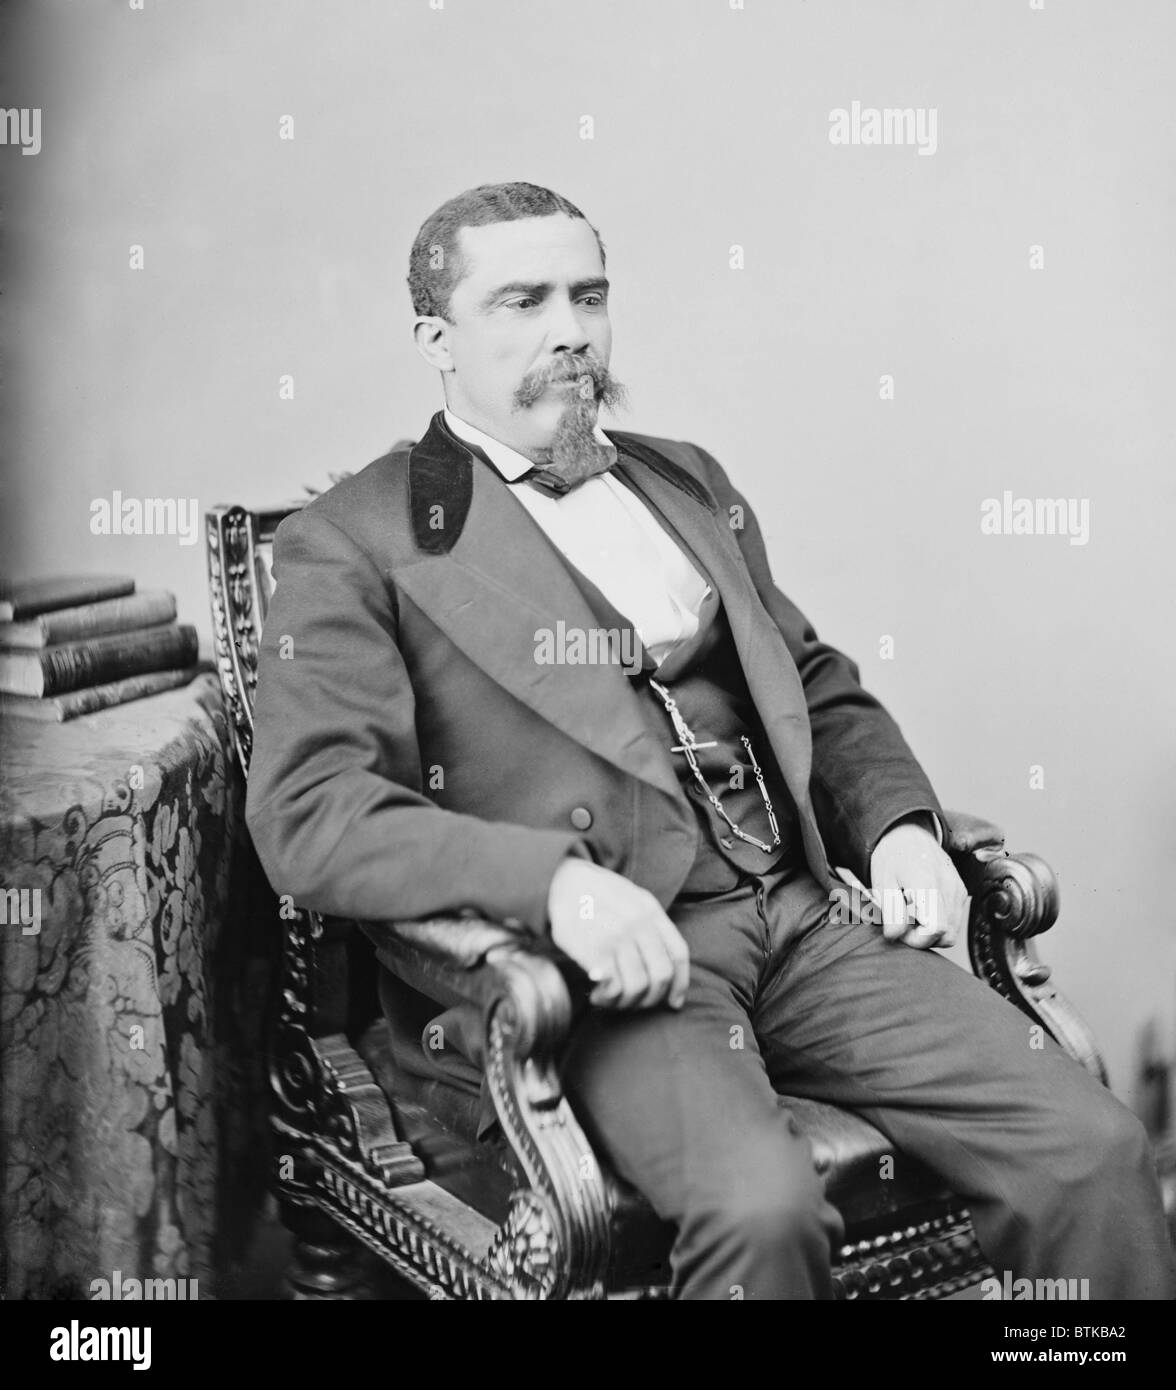 Alonzo Jacob Rancier (1834-1882), was politically active in the decade following the Civil war, holding many positions including Lieutenant Governor of South Carolina in 1870; and Republican Representative in the Forty-third Congress (1873-1875). His political career ended along with Reconstruction in 1876. Stock Photo